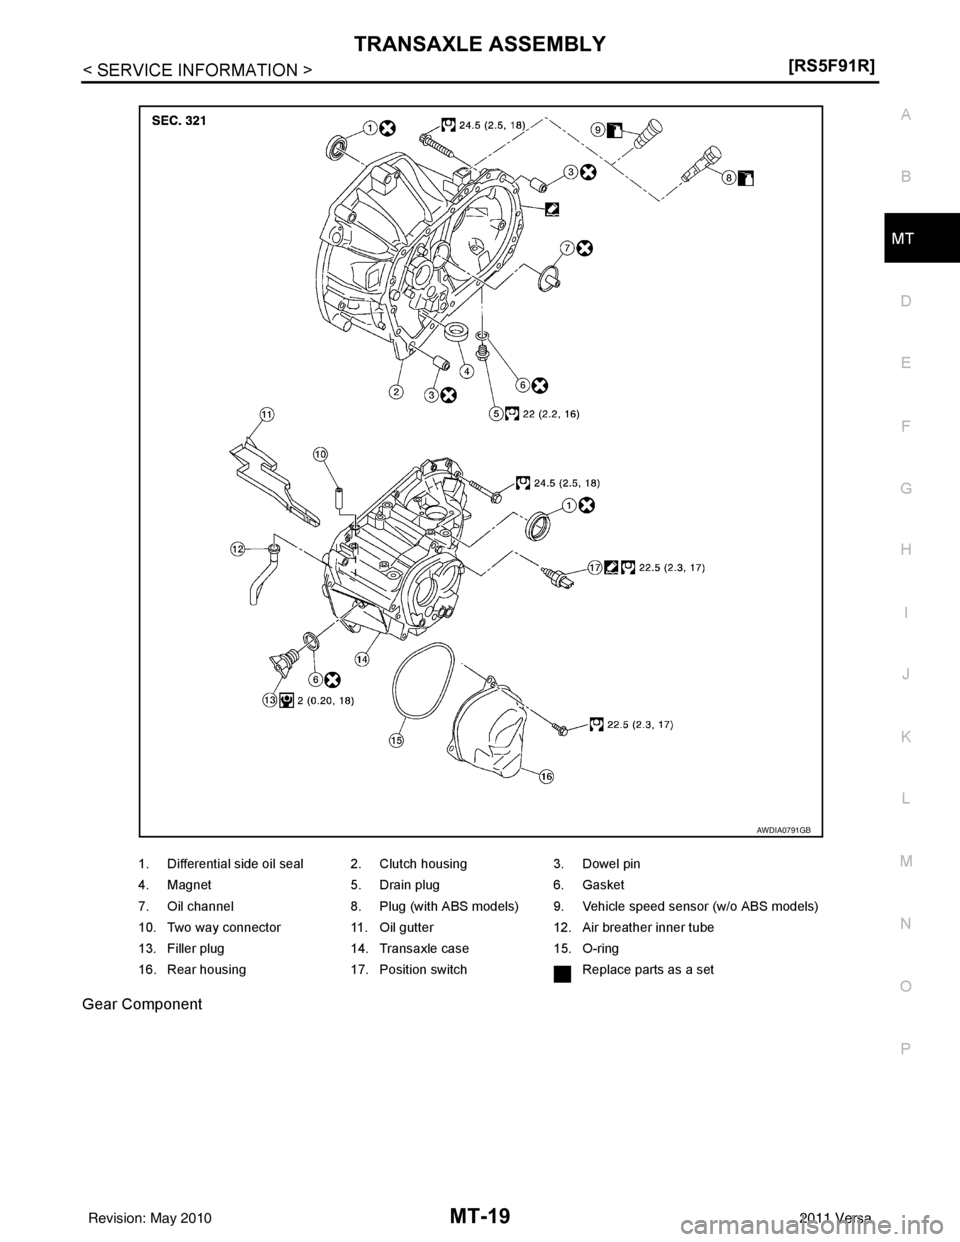 NISSAN LATIO 2011  Service Repair Manual TRANSAXLE ASSEMBLYMT-19
< SERVICE INFORMATION > [RS5F91R]
D
E
F
G H
I
J
K L
M A
B
MT
N
O P
Gear Component
1. Differential side oil seal 2. Clutch housing
3. Dowel pin
4. Magnet 5. Drain plug6. Gasket
